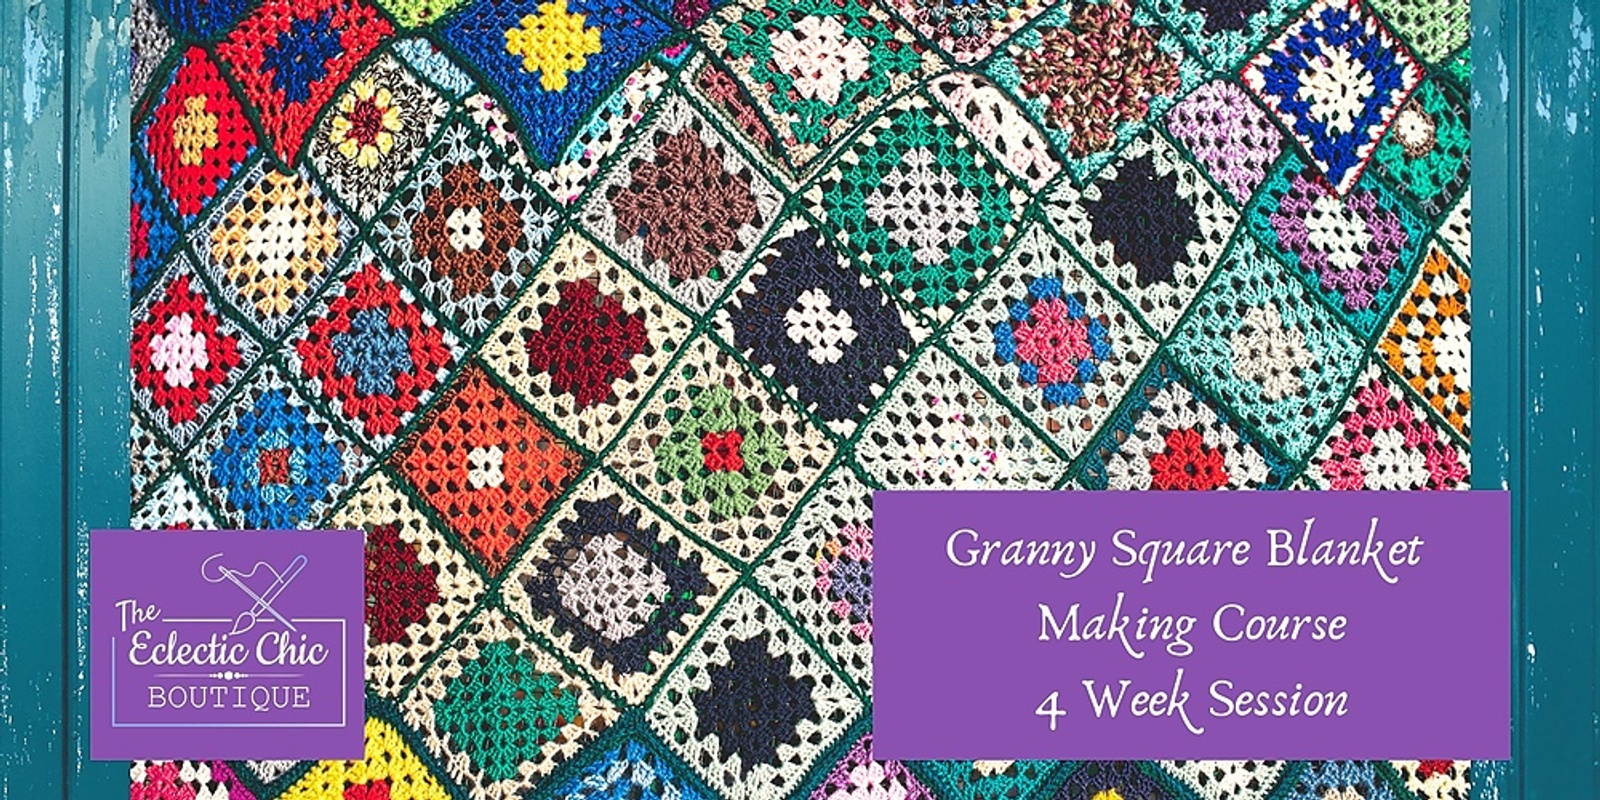 Crochet Granny Square Blanket Making Course - 4 Week Session